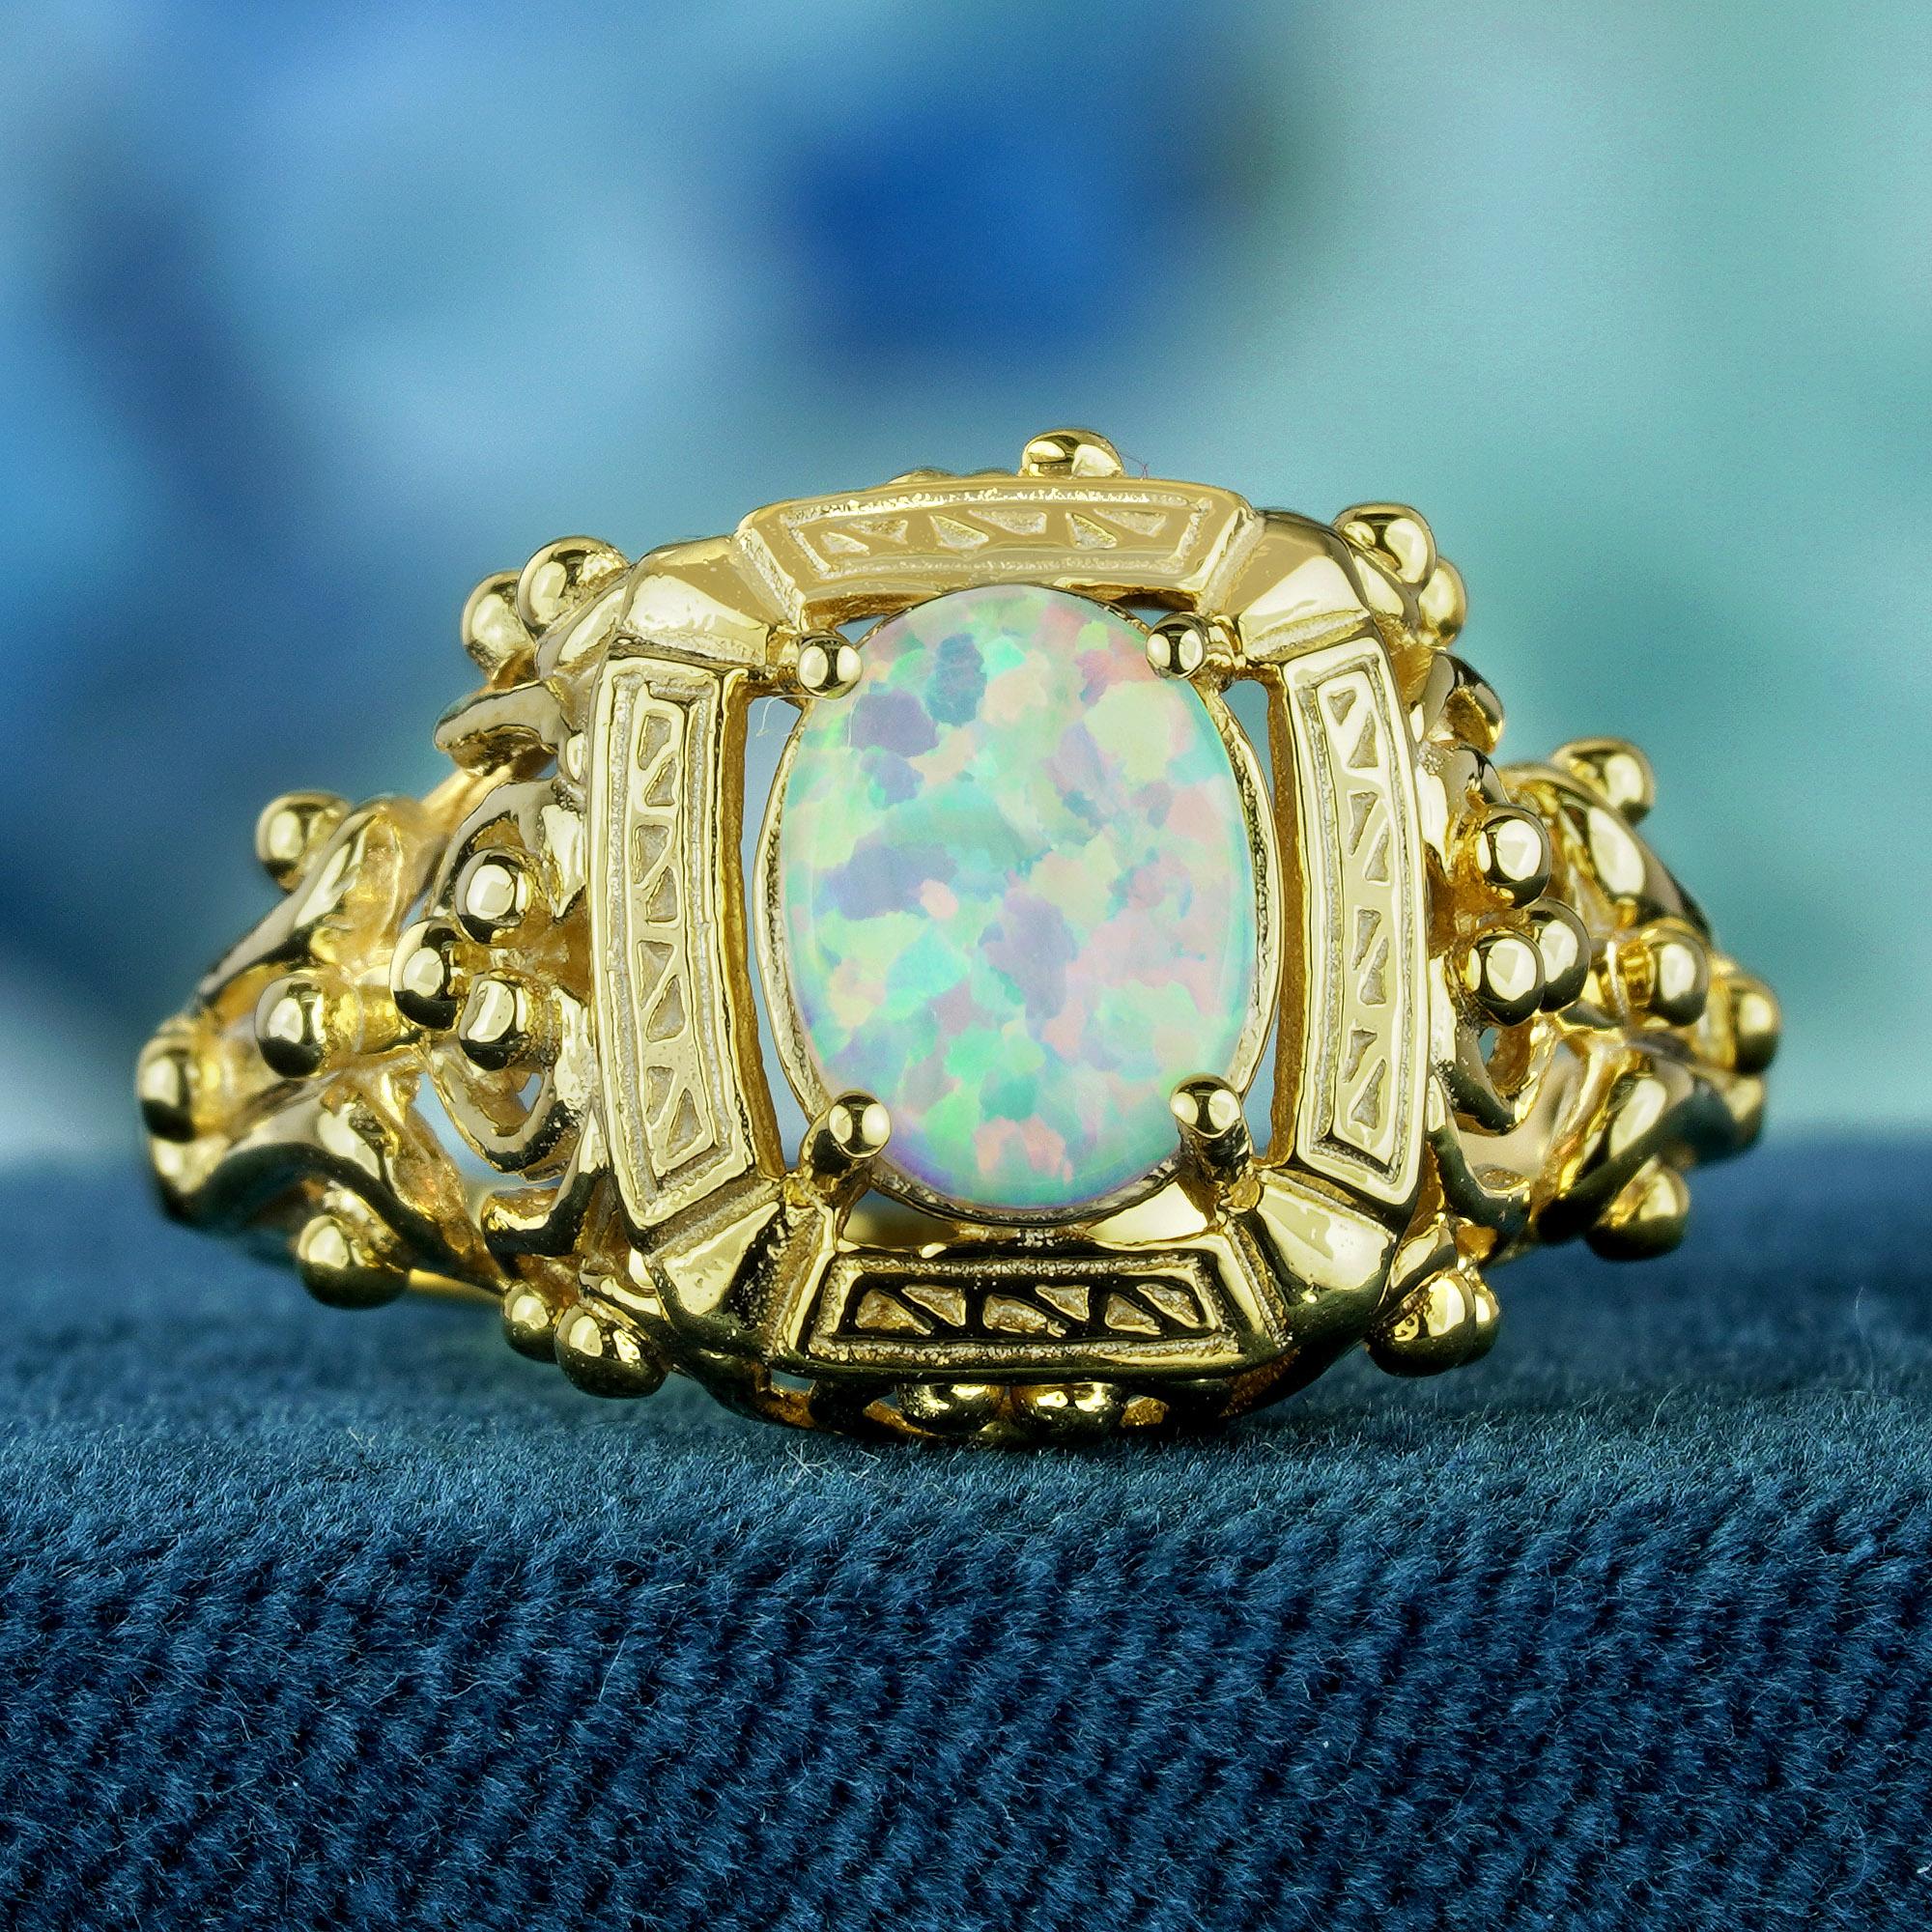 Experience timeless elegance elevated to new heights. Surrender to the captivating allure of our Opal Vintage Style Cocktail Filigree Ring. Meticulously crafted with an open yellow gold lacey band, adorned with swirling curves throughout. Let the